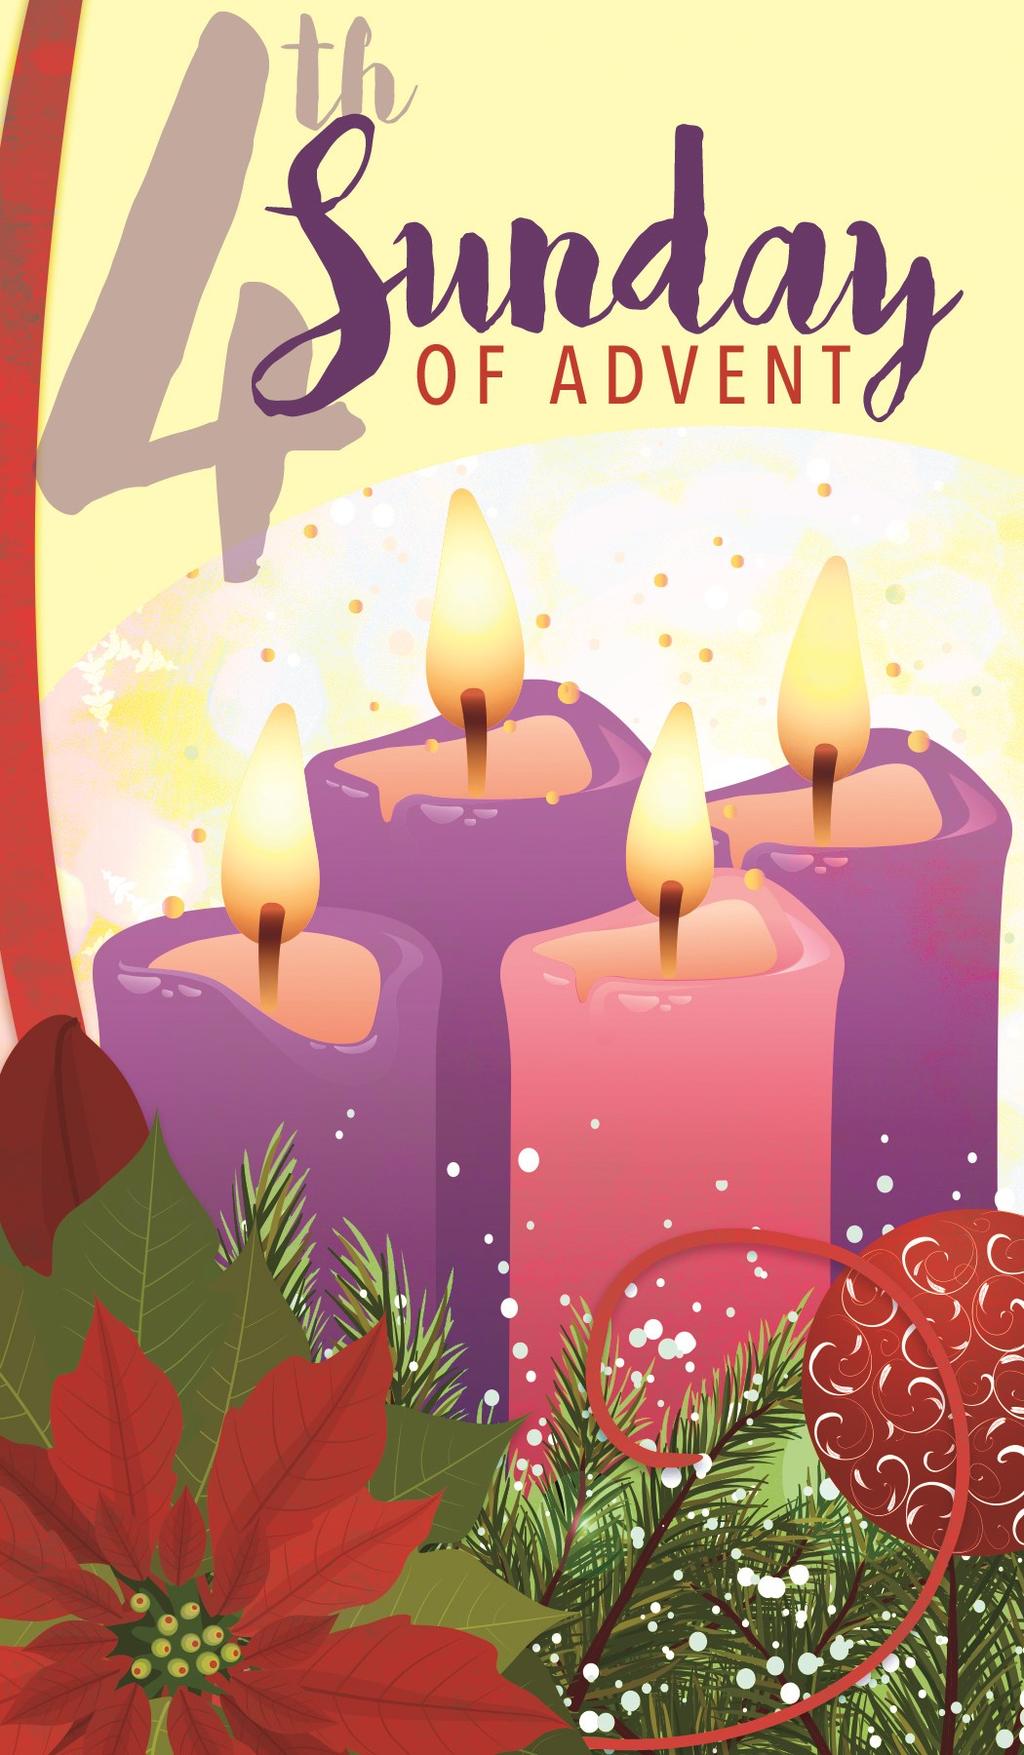 December 18, 2016 The Parishes of Page 1 Fourth Sunday of Advent December 18, 2016 MALLIA'S MOMENTS by Fr.